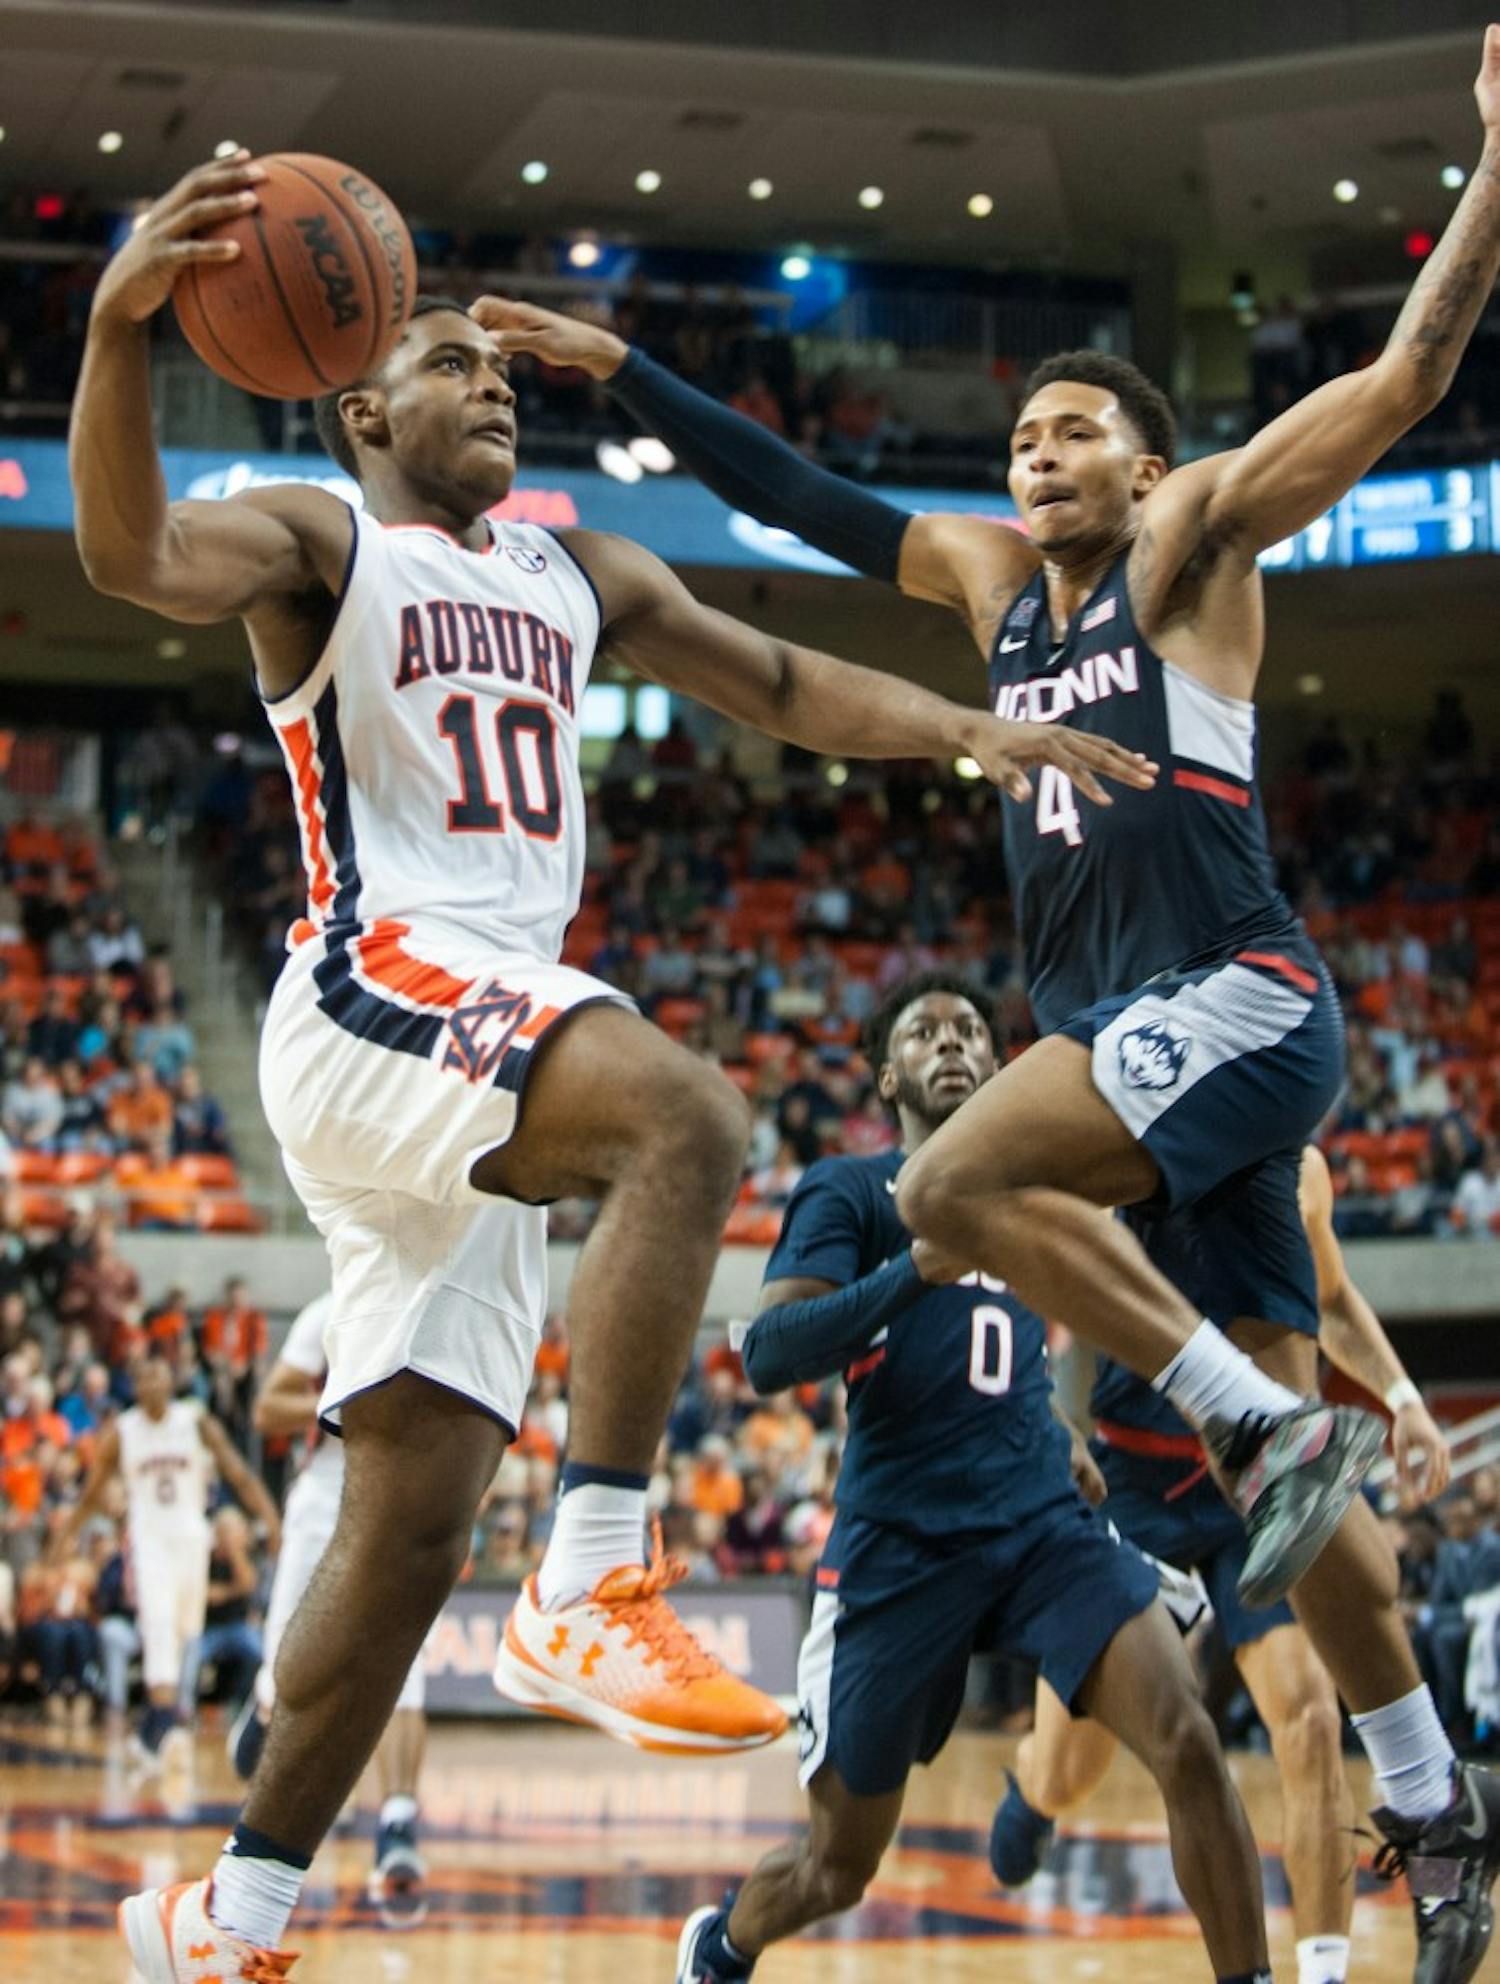 Davion Mitchell (10) looks to take the ball to the basket in the second half. Auburn vs UConn on Saturday, Dec. 23 in Auburn, Ala.